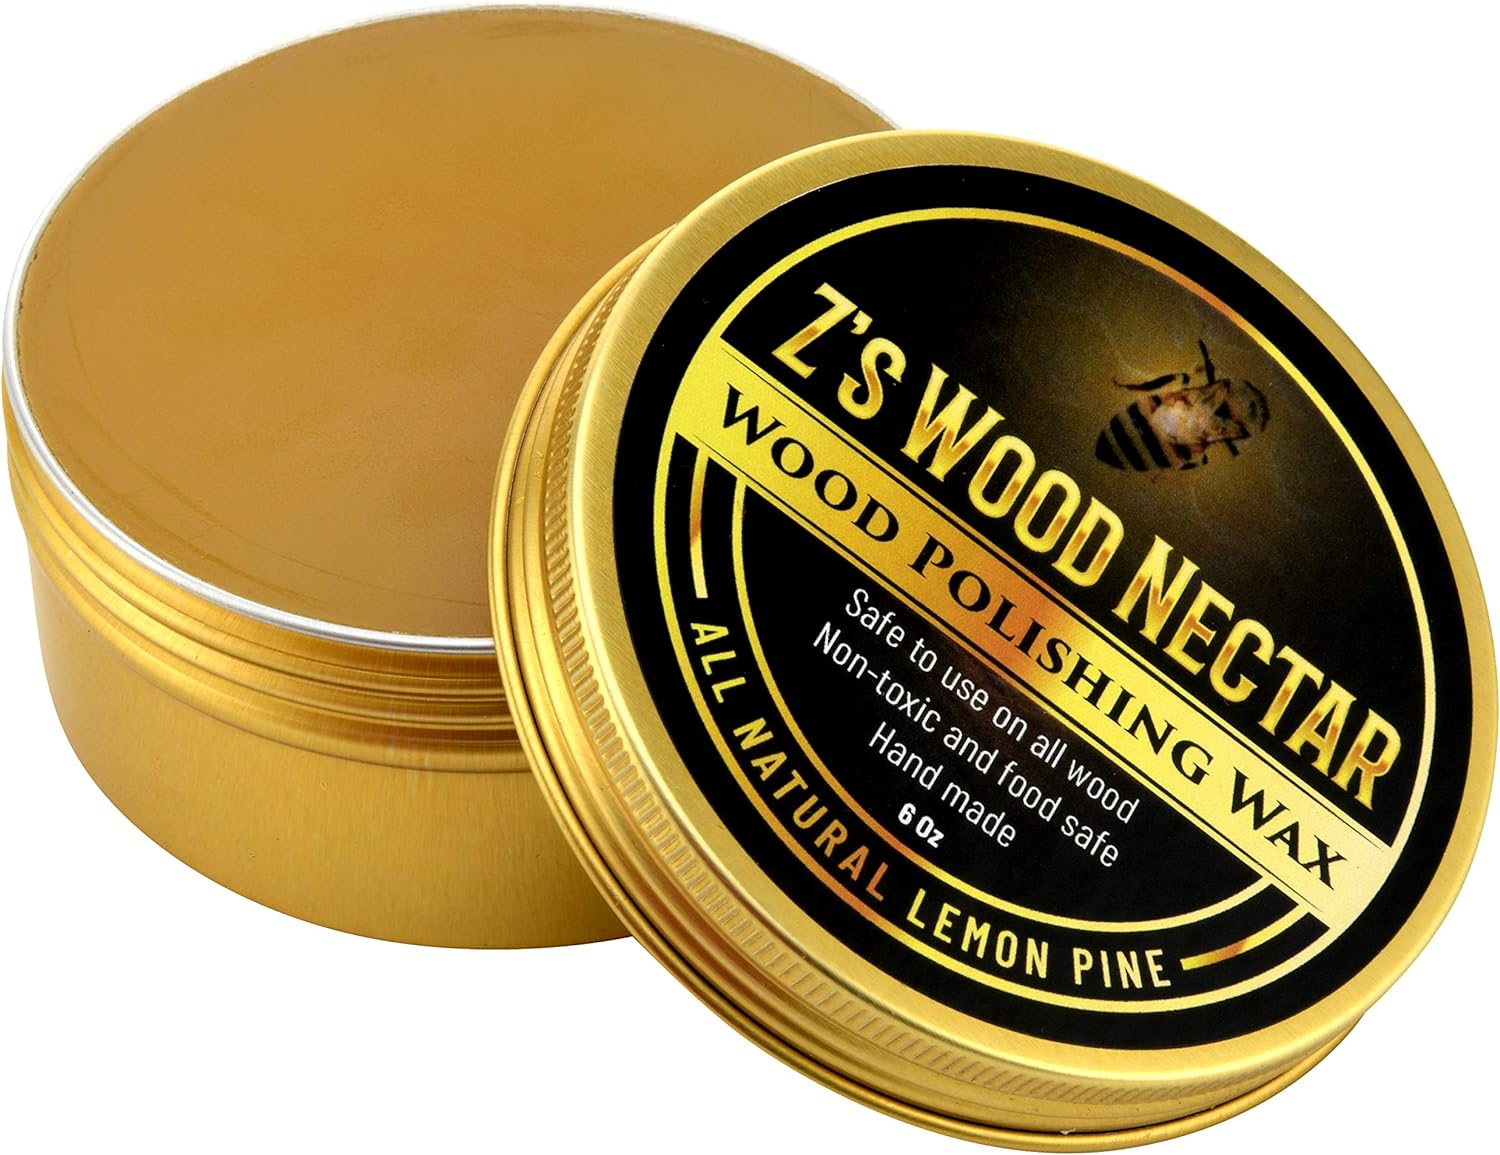 Z's Wood Nectar All Natural Beeswax Furniture Polish & Conditioner (6oz) - Lemon Pine